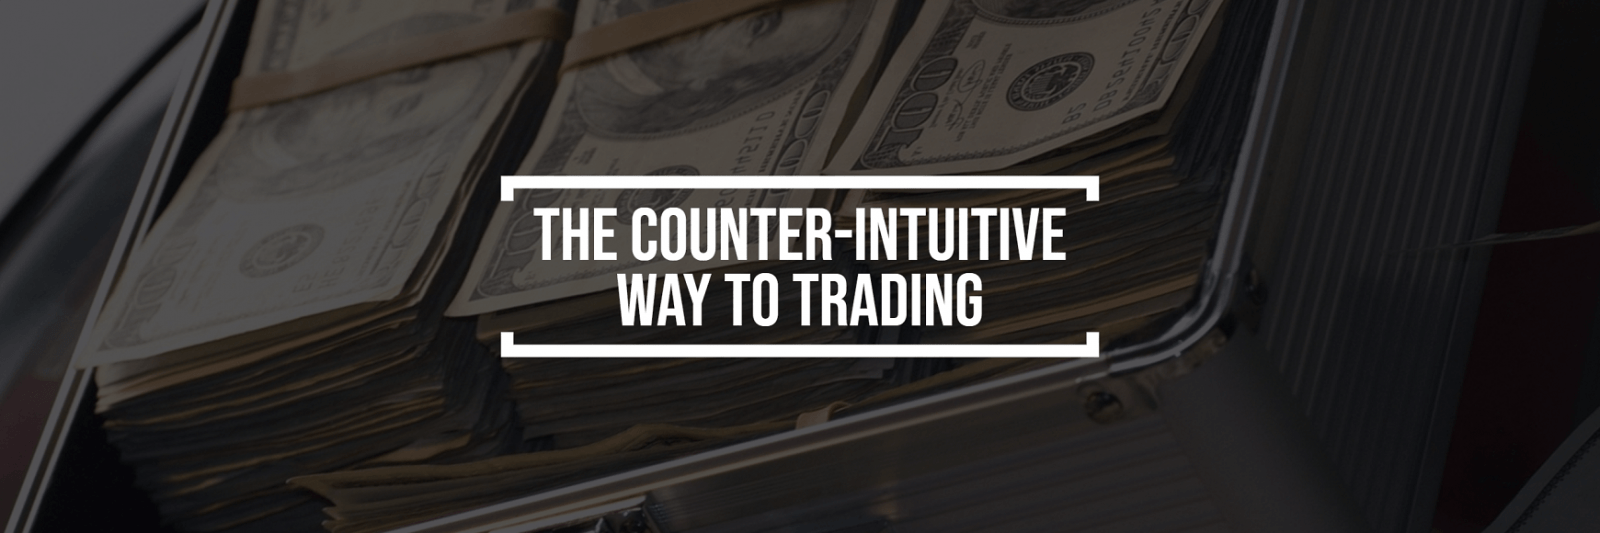 The Counter-Intuitive Way to Trading